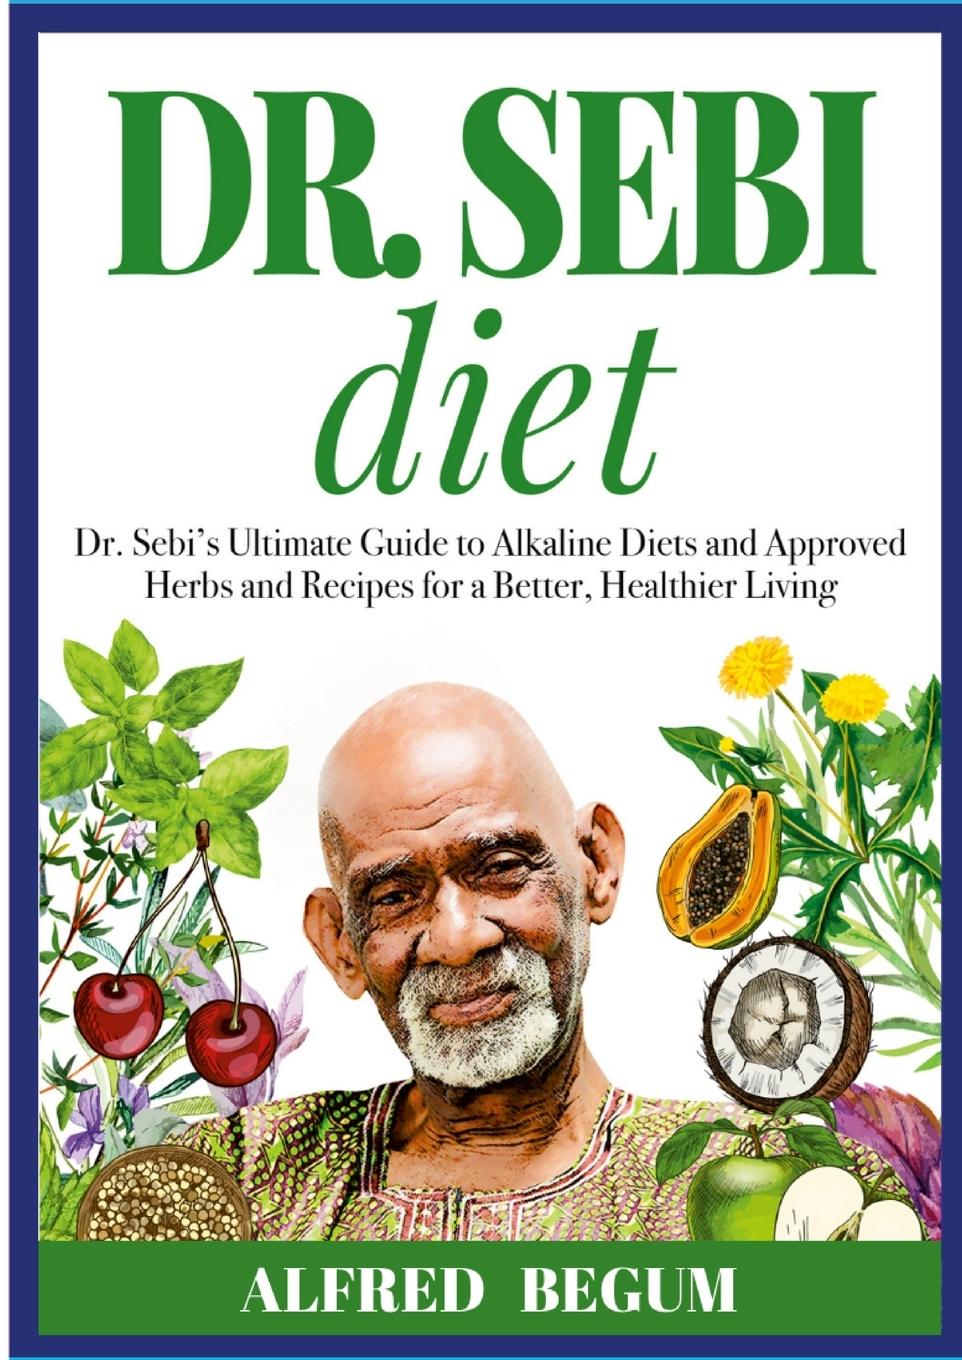 Knjiga DR. SEBI DIET. Dr. Sebi's Ultimate Guide to Alkaline Diets and Approved Herbs and Recipes for a Better, Healthier Living 